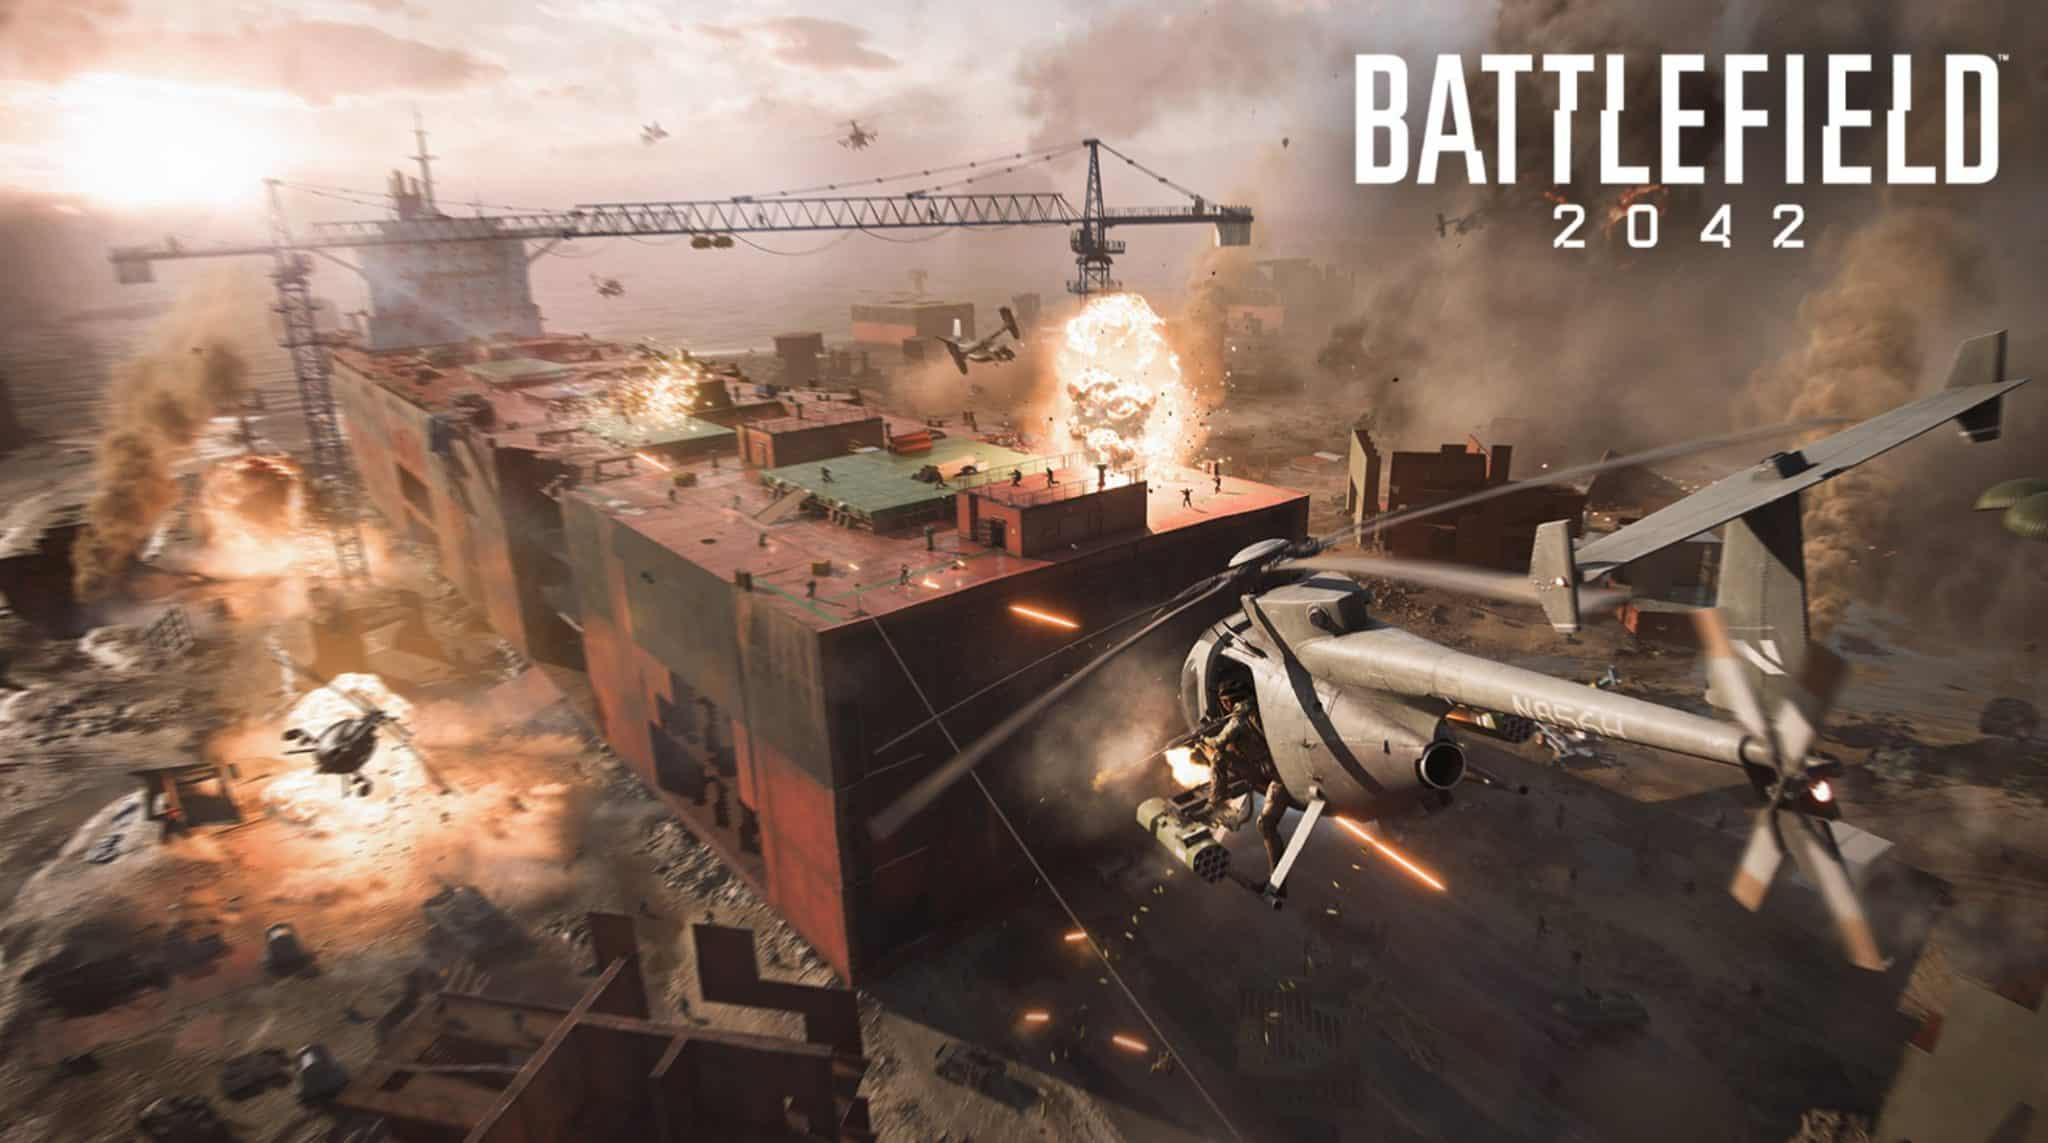 Battlefield 2042's Massive Maps to Be Totally Overhauled